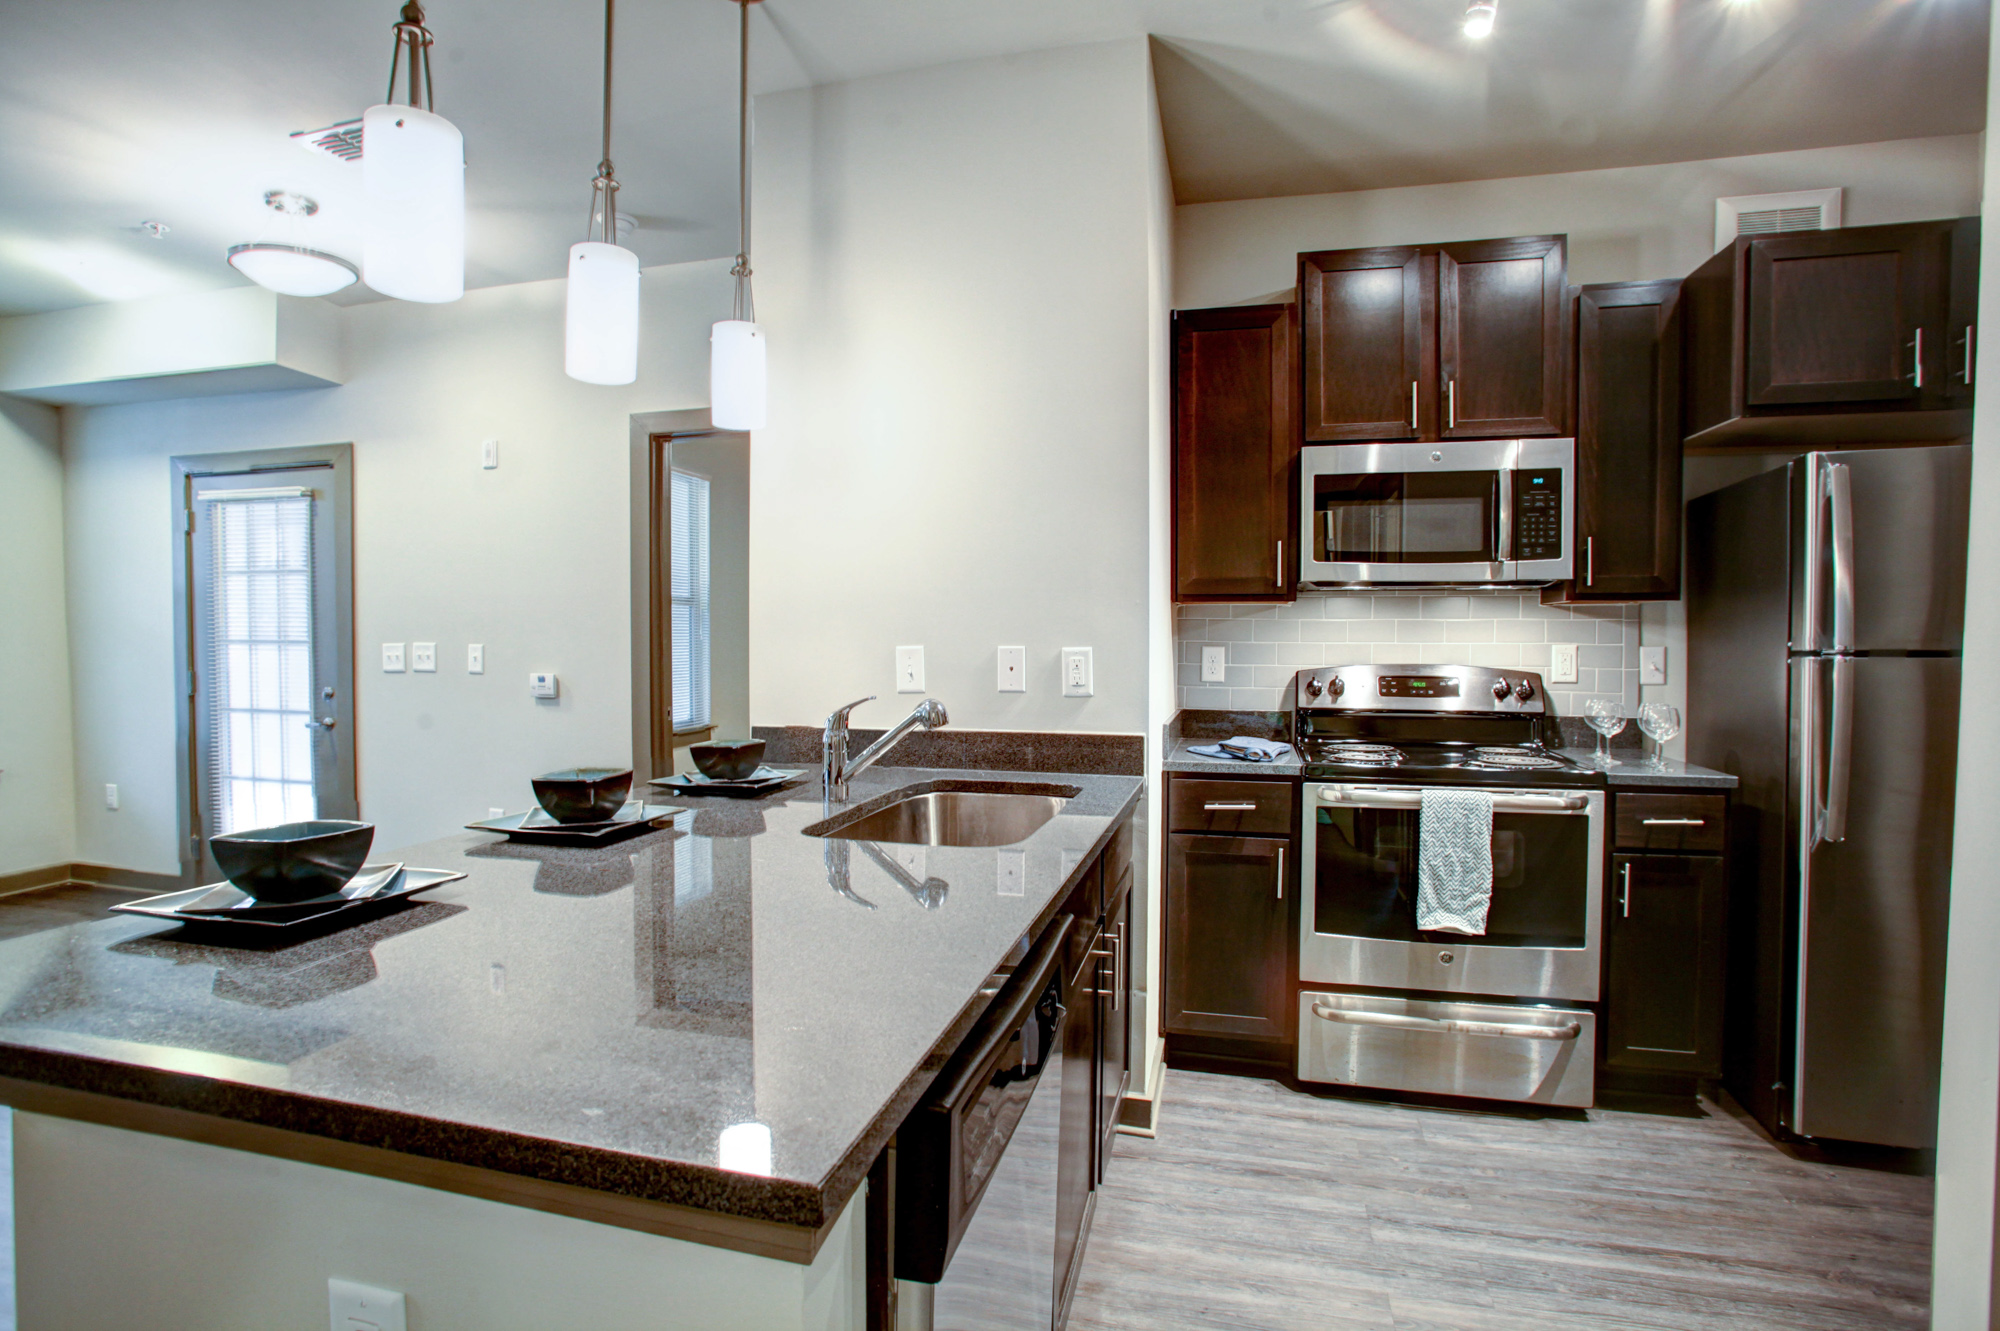 On the left is a kitchen island and on the right are stainless steel appliances at Park 9 apartments near Atlanta, GA.